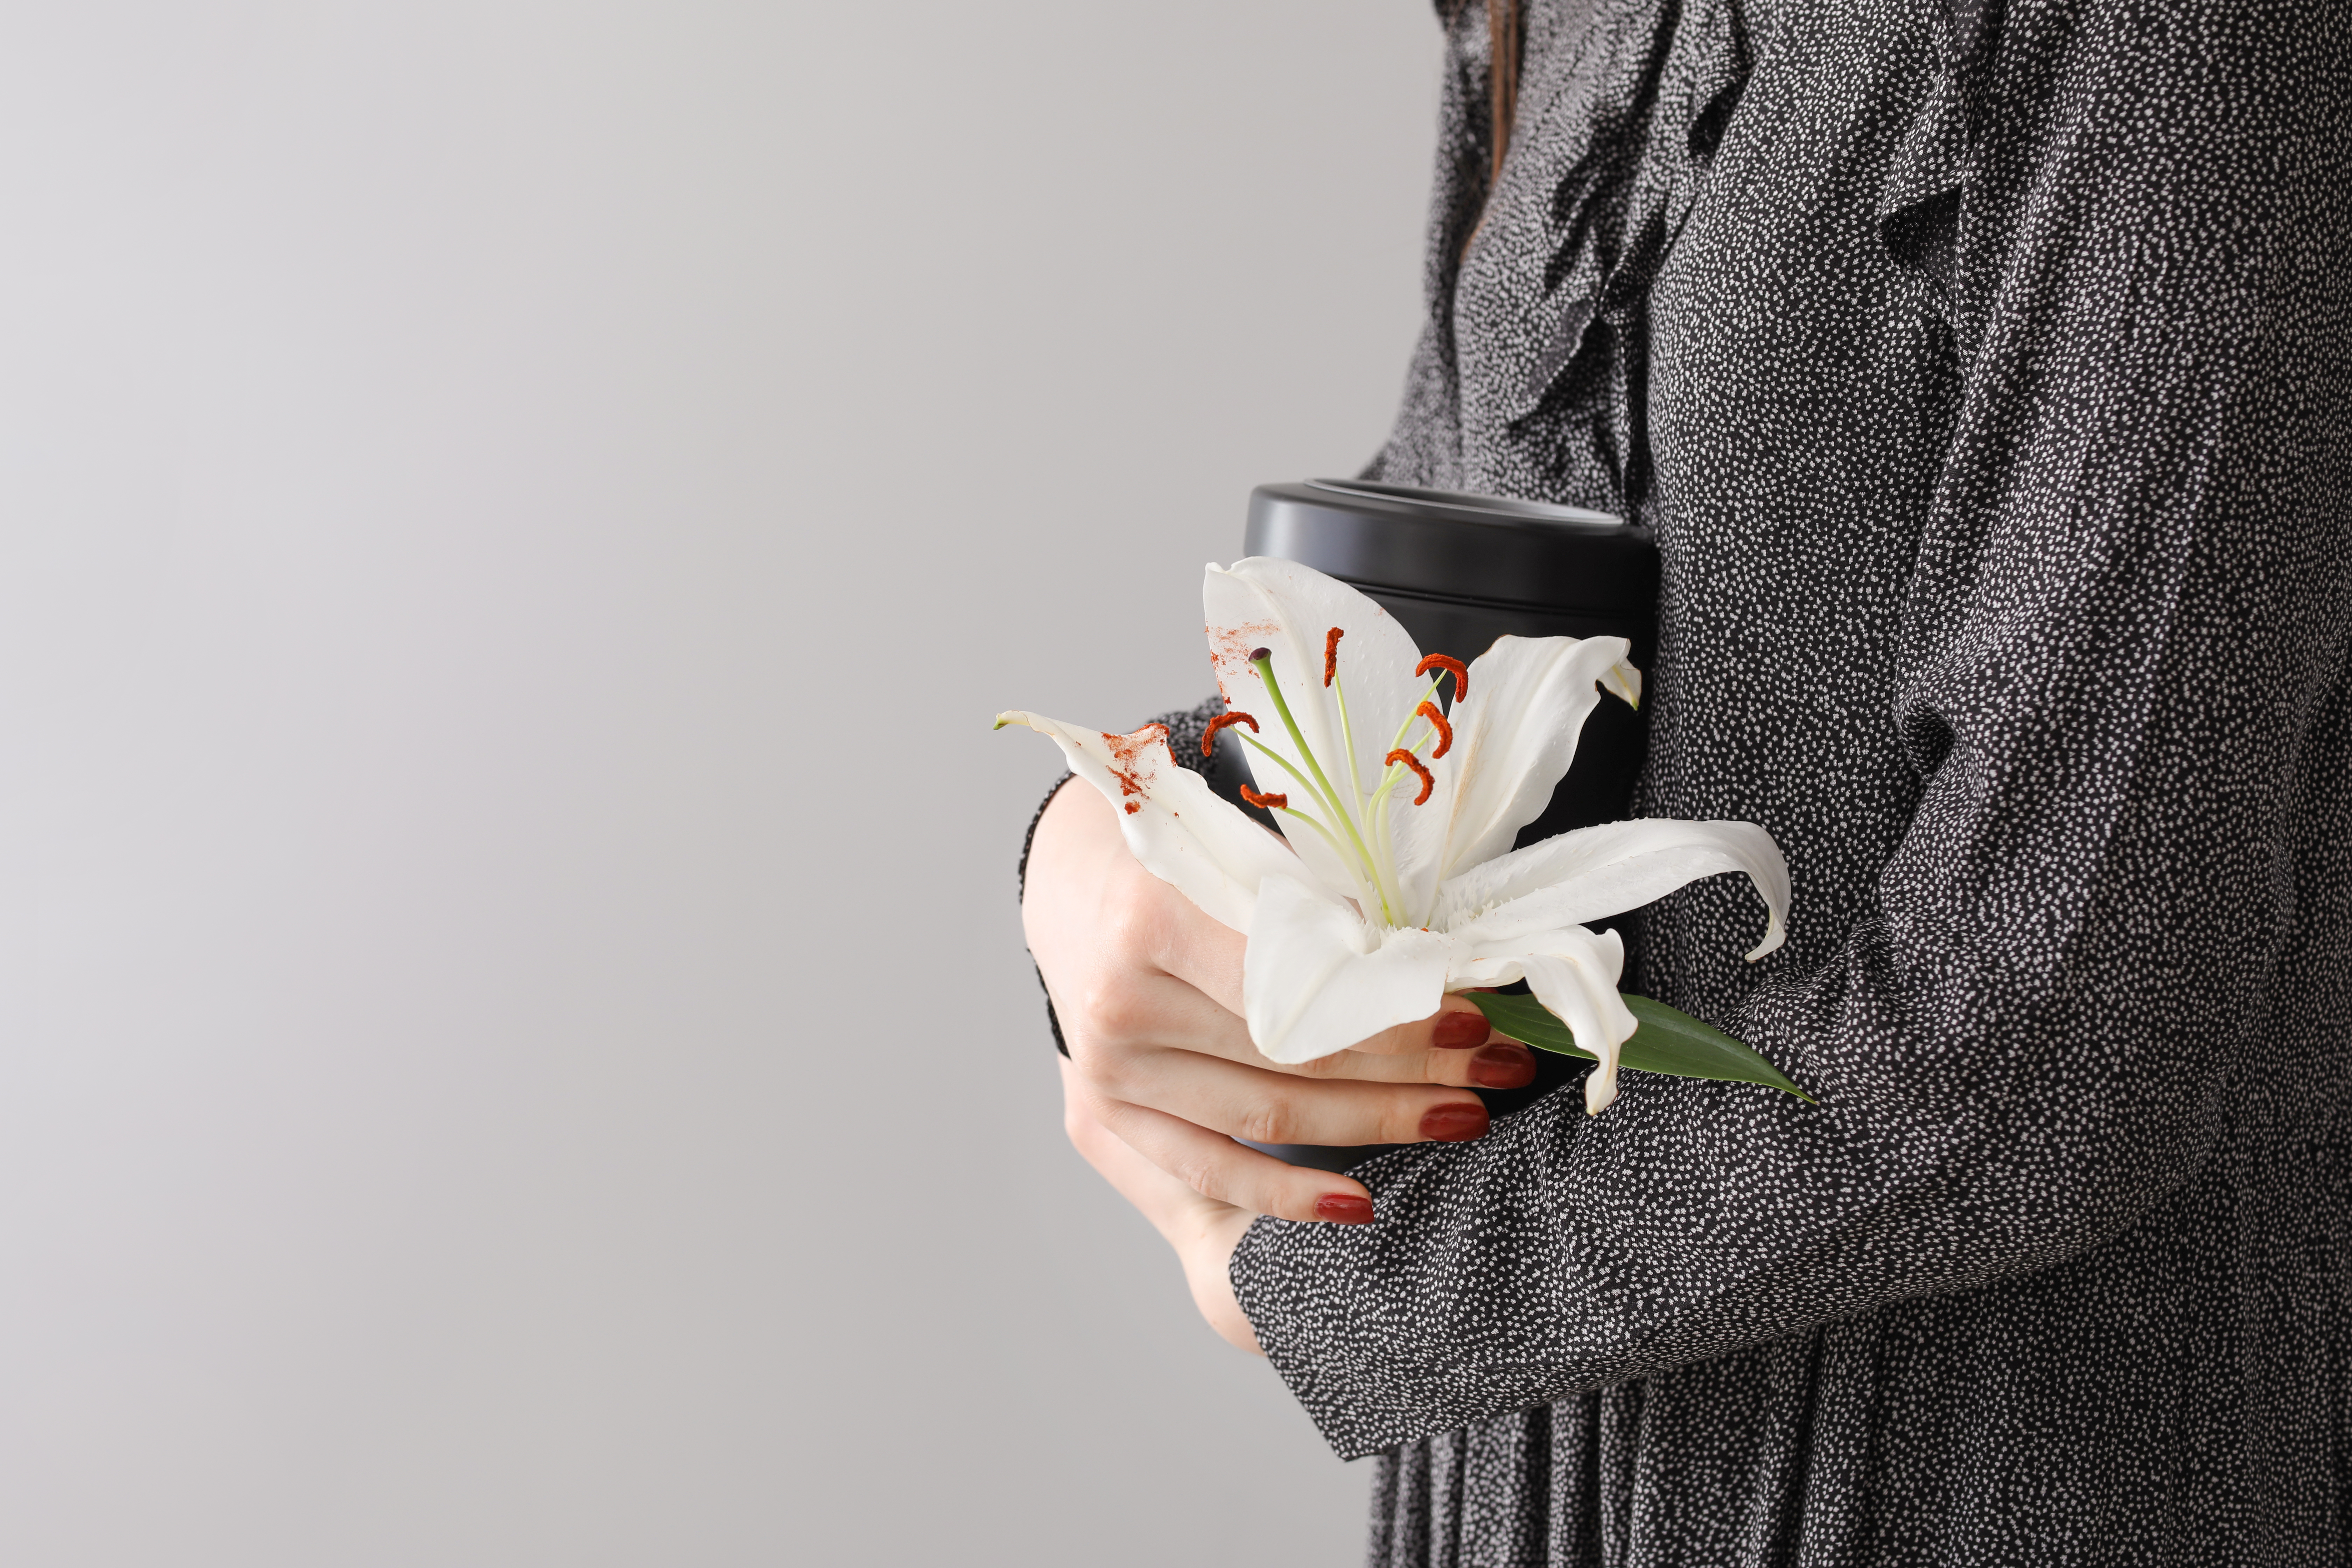 A woman is seen holding a mortuary urn and a white lily flower | Source: Shutterstock